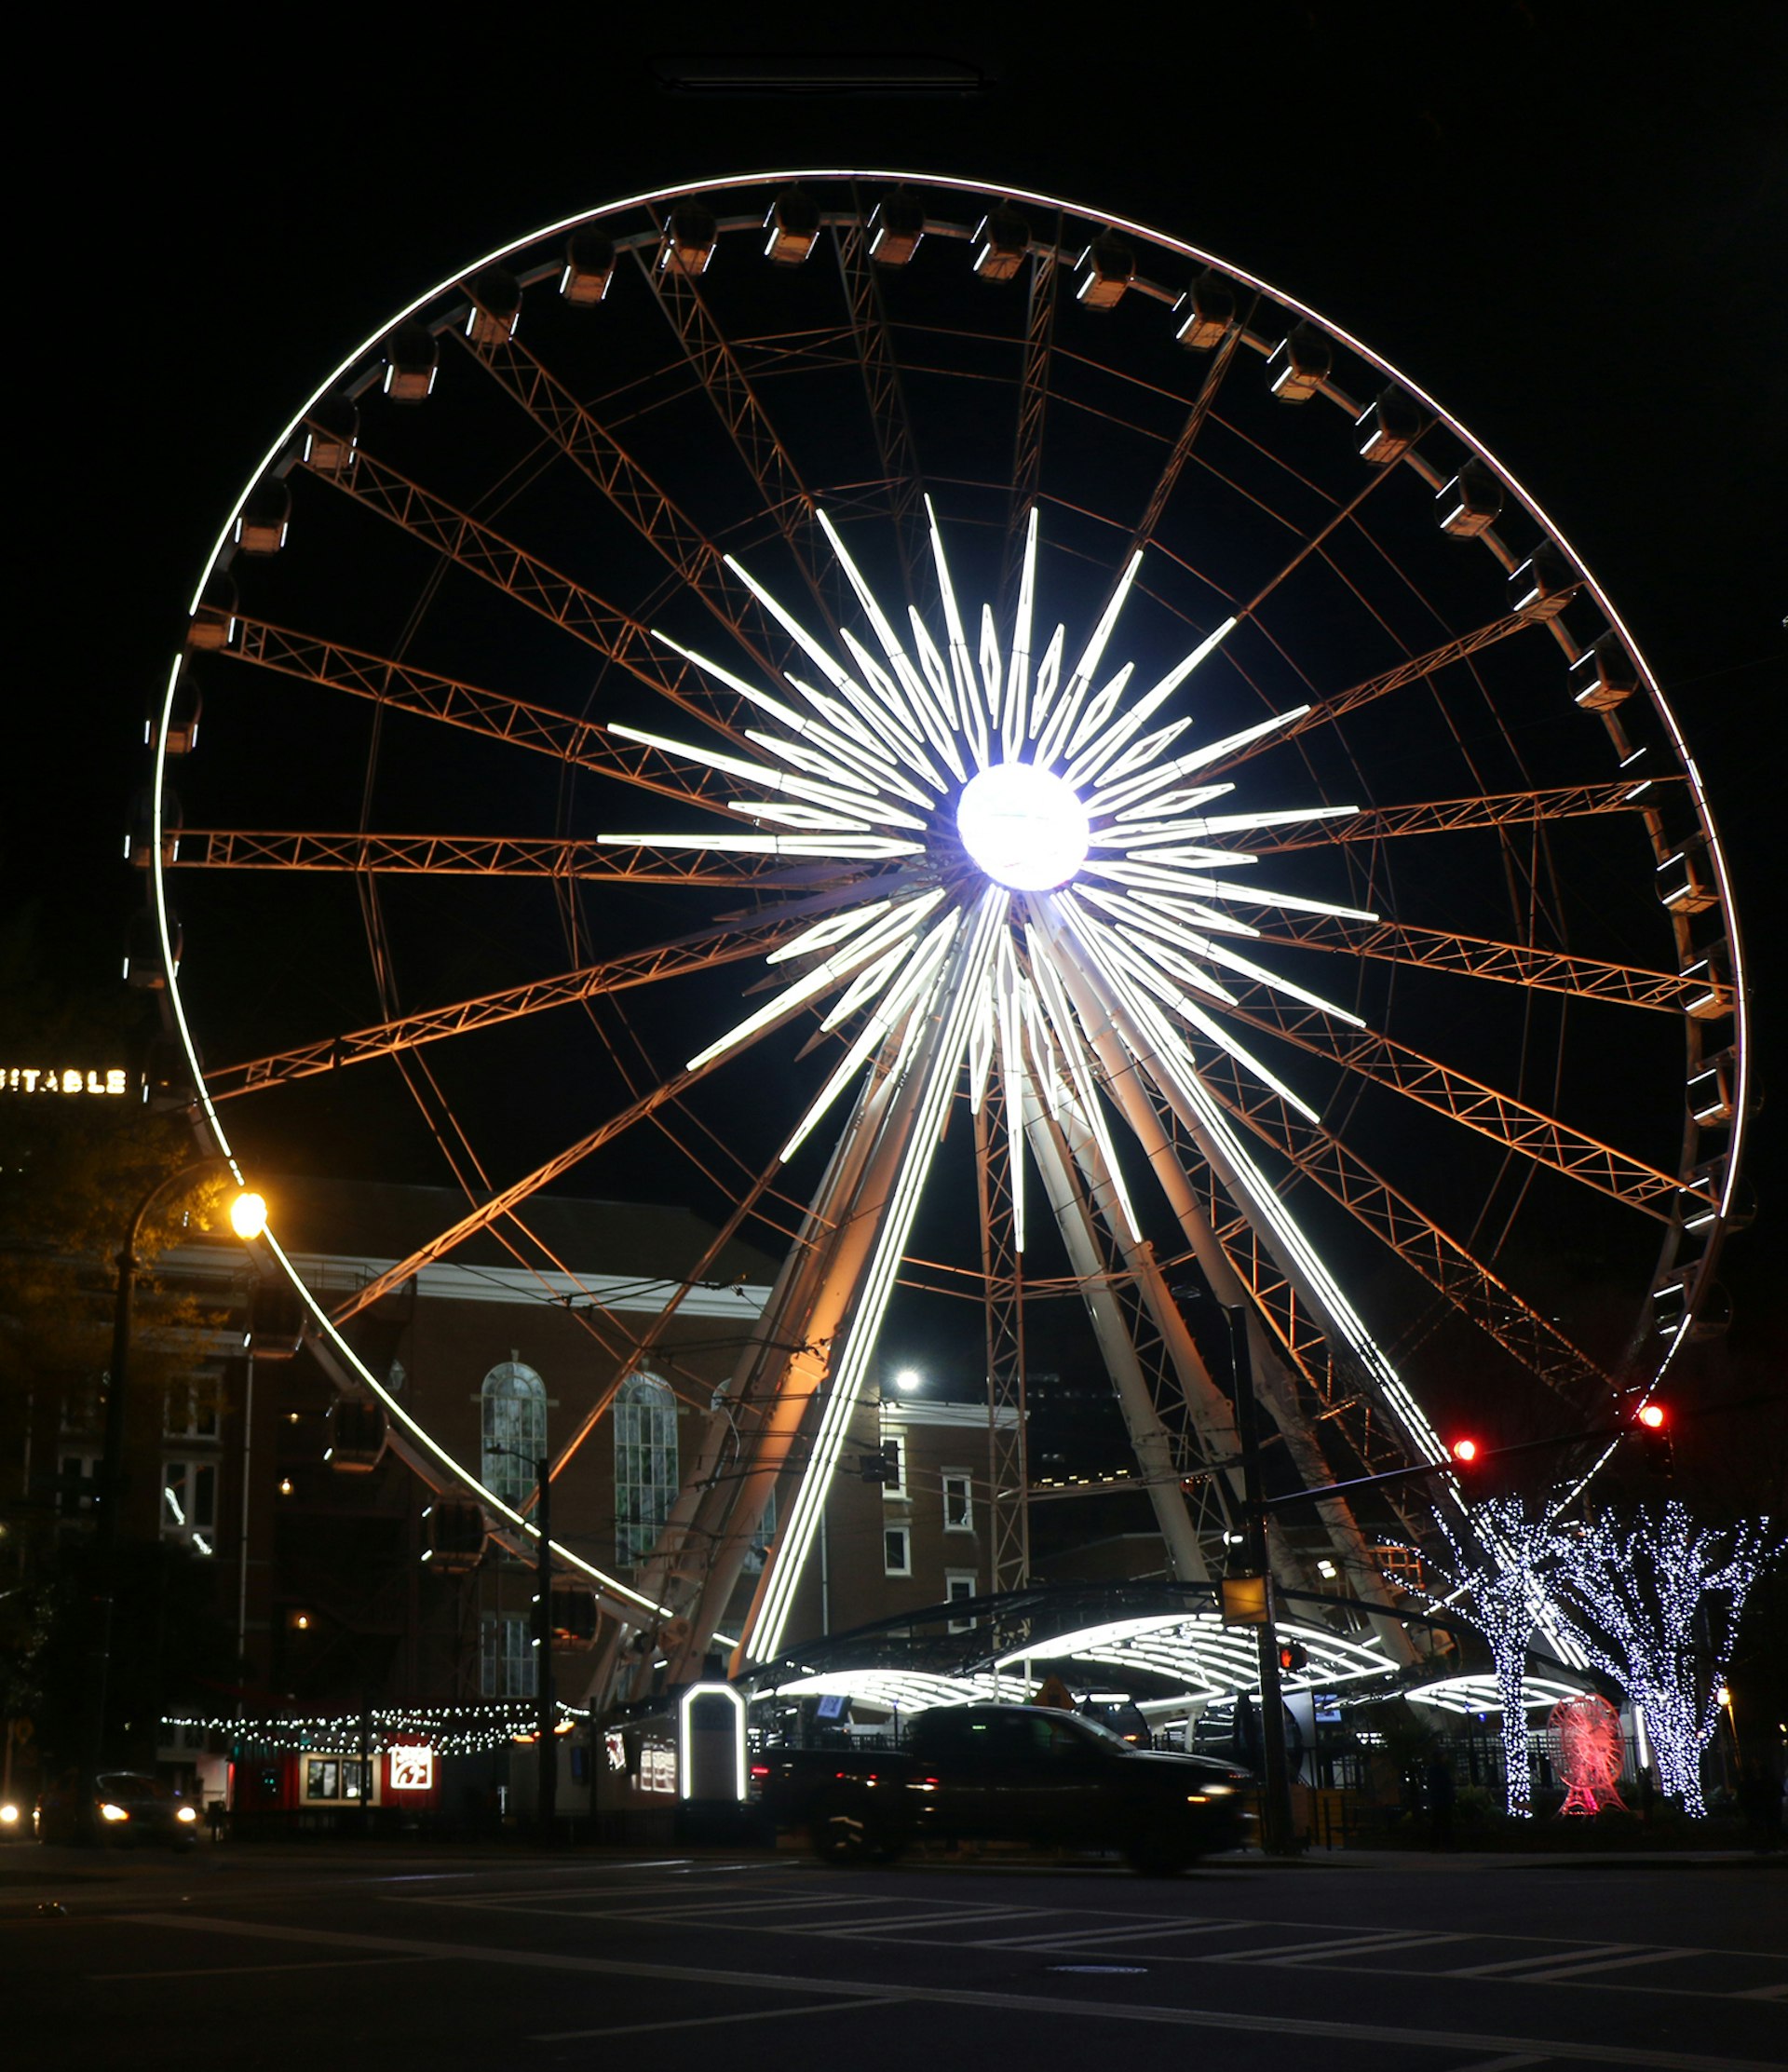 Large Ferris wheel in the center of Atlanta is lit up at night © Ni'Kesia Pannell / Lonely Planet